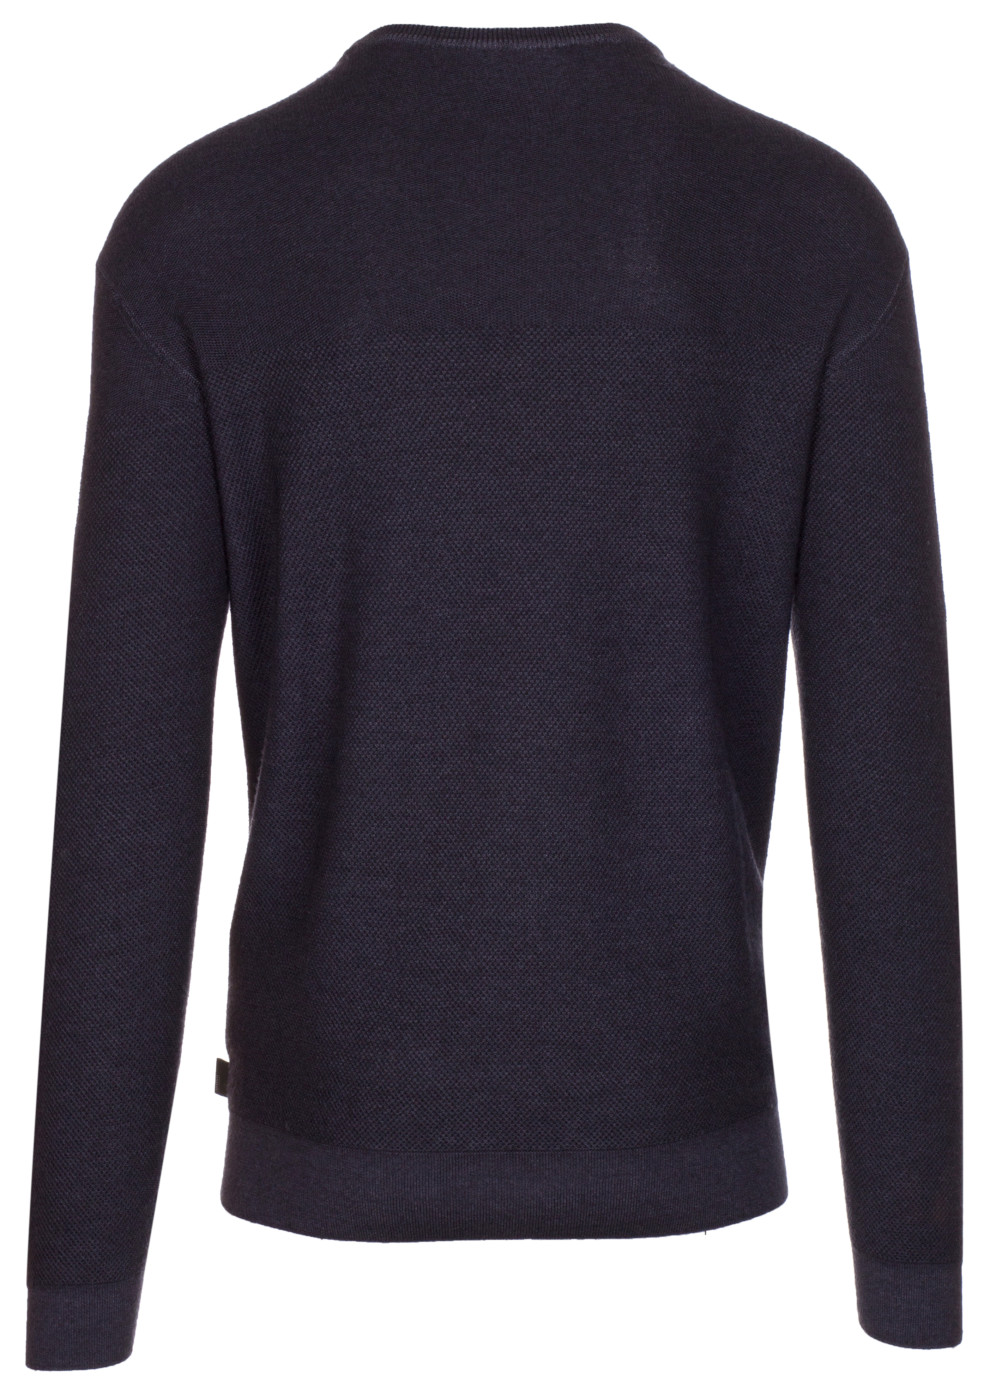 woocommerce-673321-2209615.cloudwaysapps.com-armani-collezioni-mens-dark-grey-100-wool-pullover-knitwear-high-neck-sweater